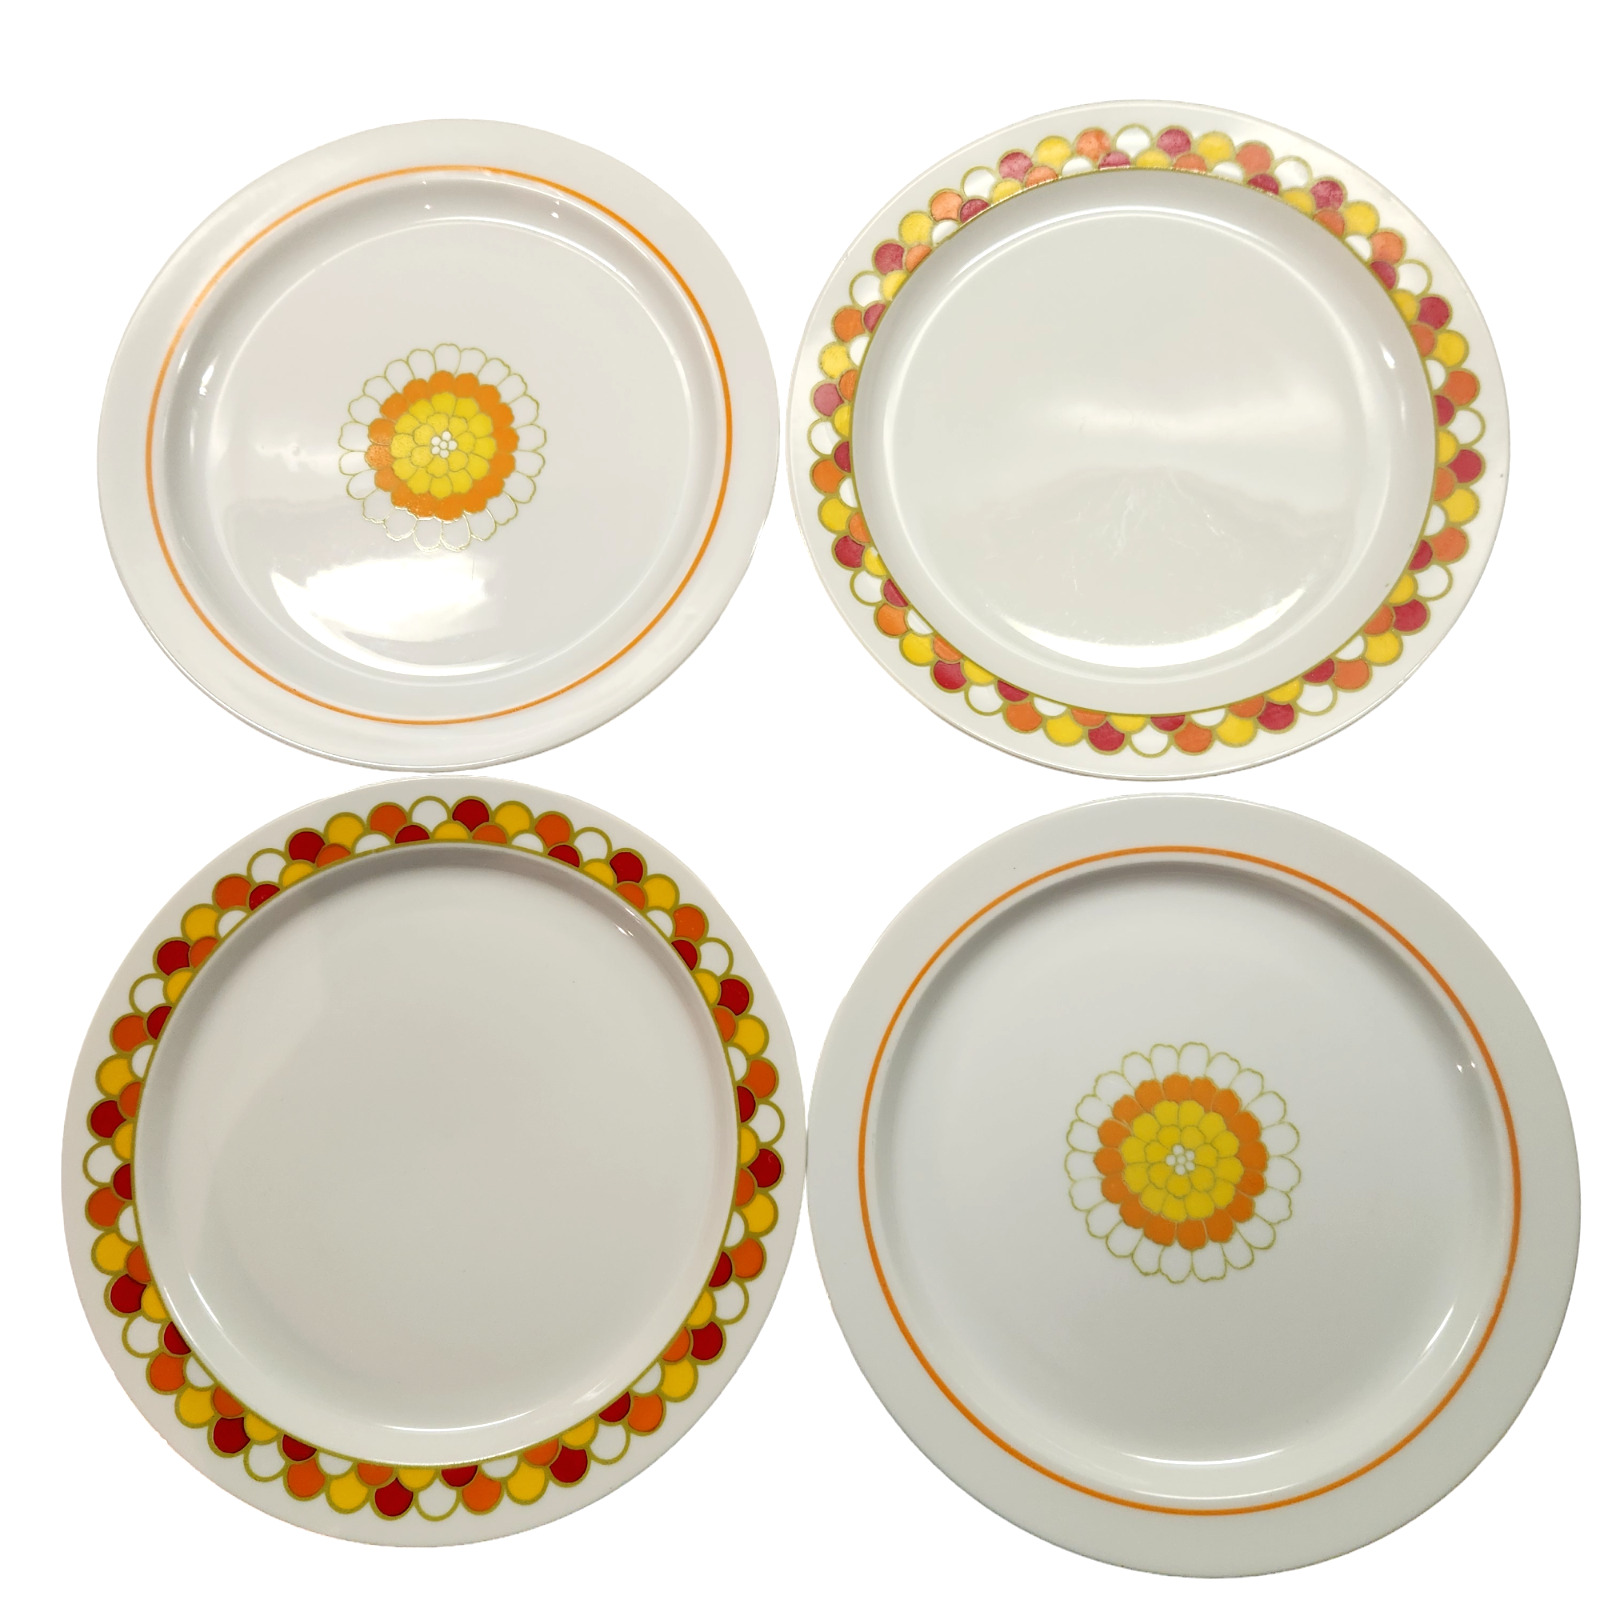 Vintage George Briard Set of 4 Florette and Carousel China Dinner Plates